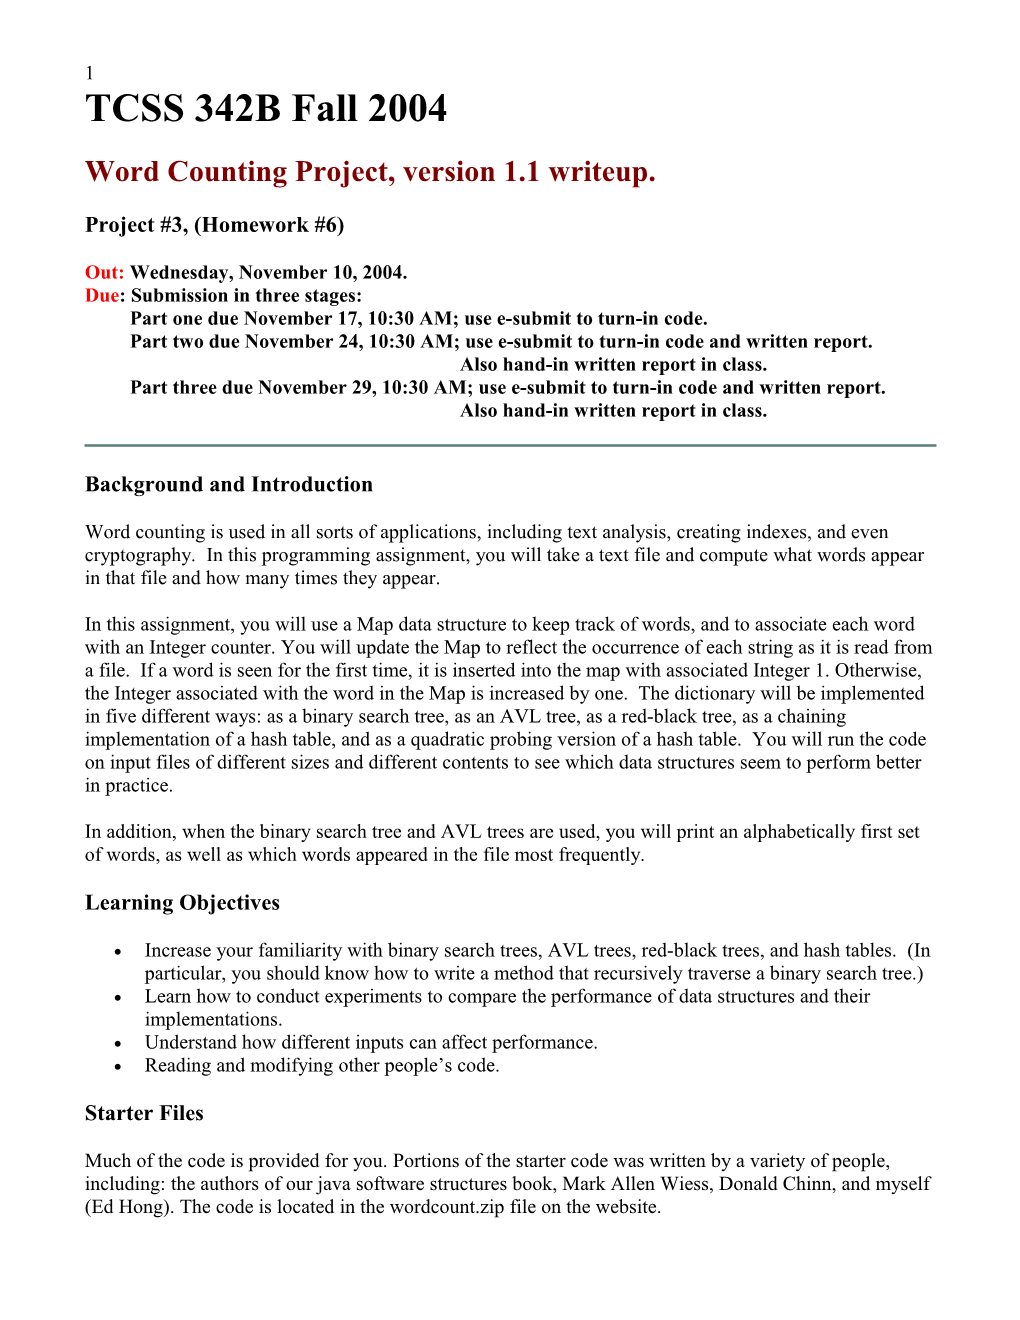 Word Counting Project, Version 1.1 Writeup